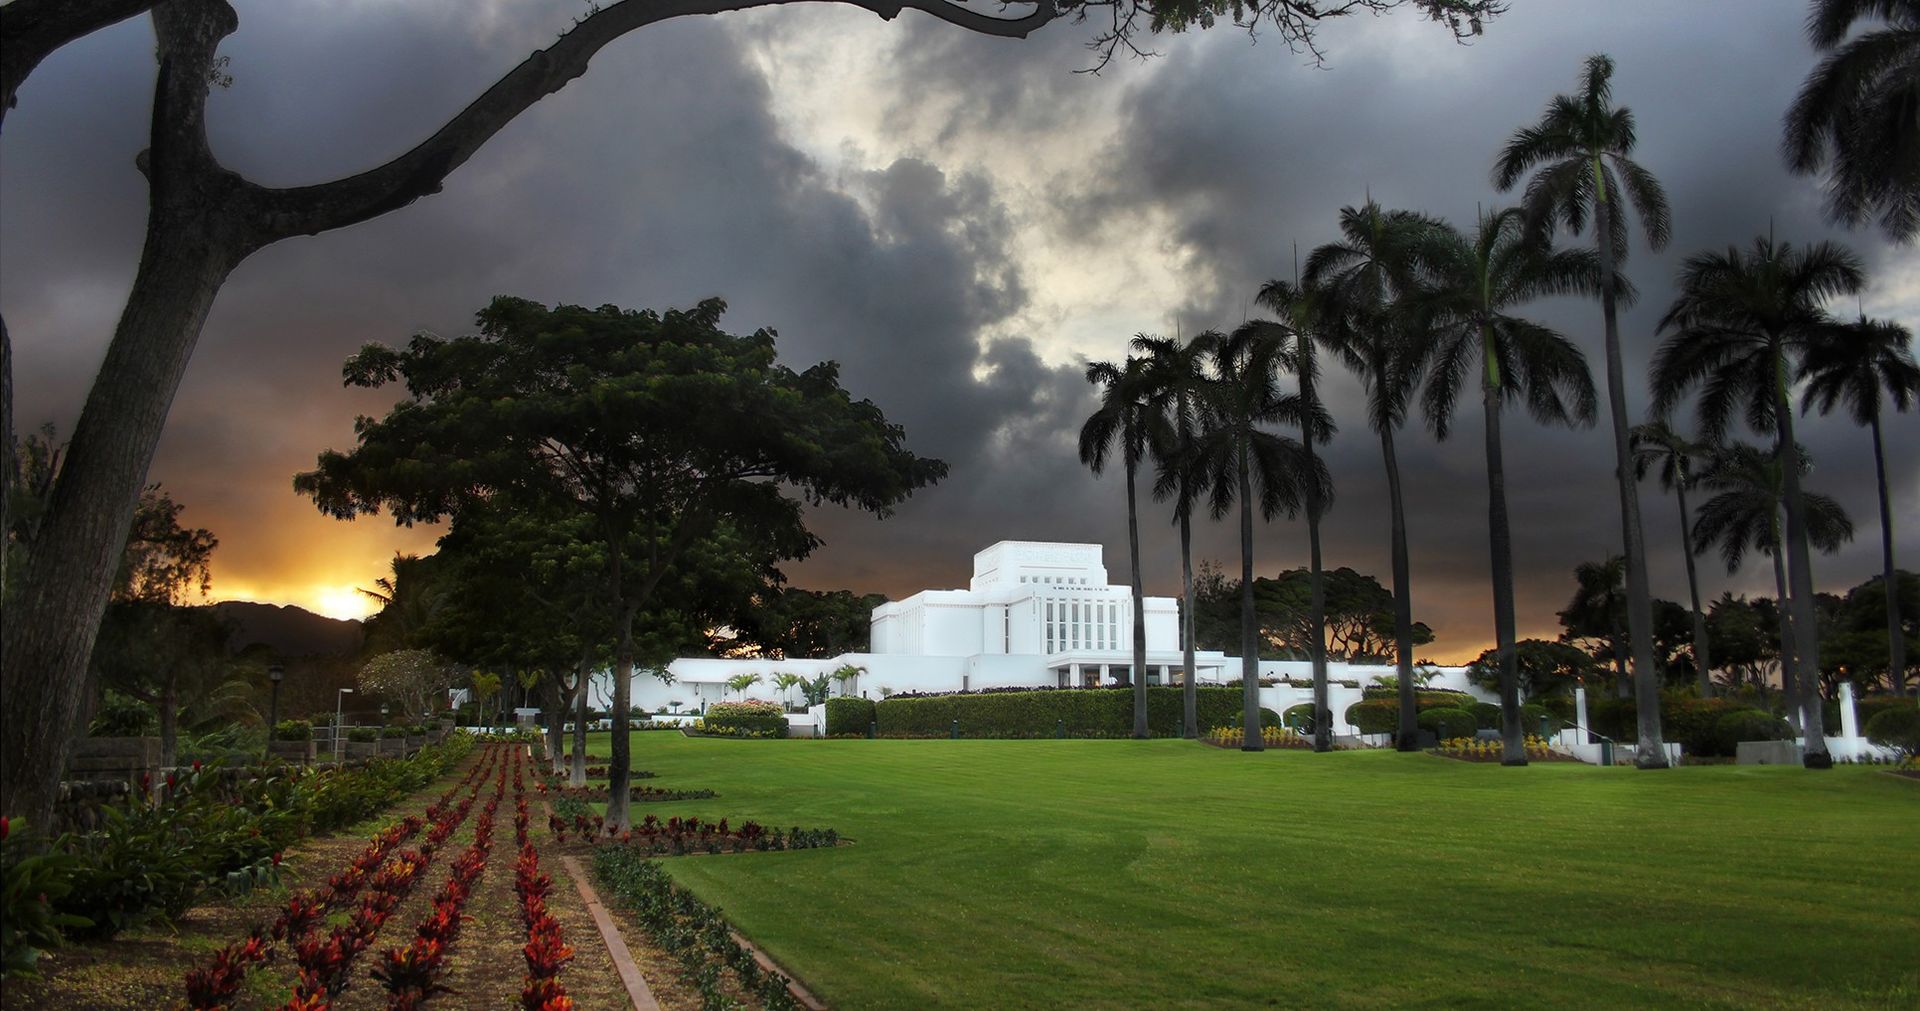 Exterior photo of the Laie Hawaii Temple with dark clouds in the background.